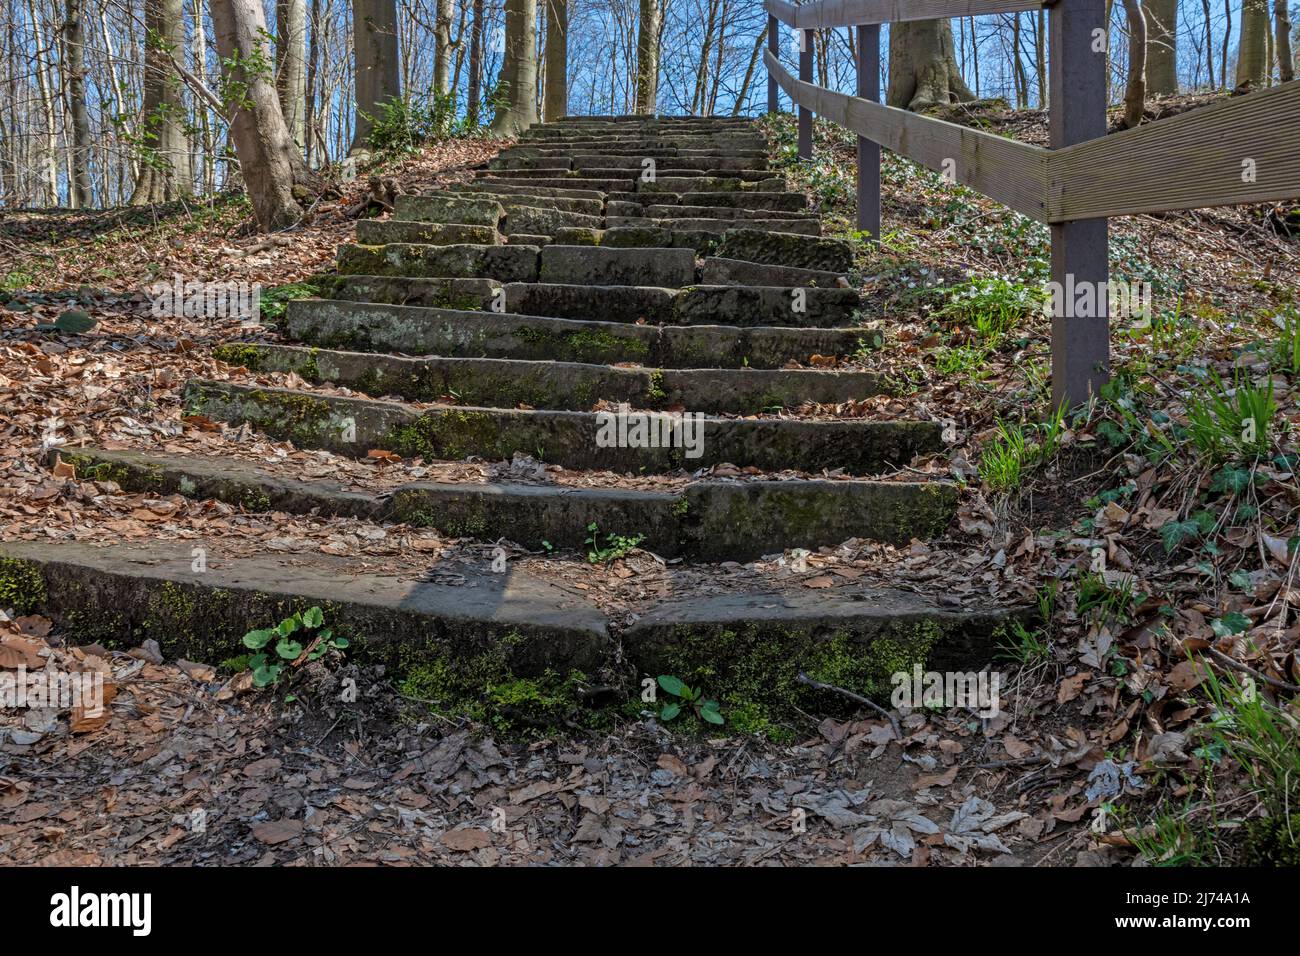 Up the stairs. The Laves Path leads up a staircase from the pyramid to the temple. Strenuous but beautiful Stock Photo